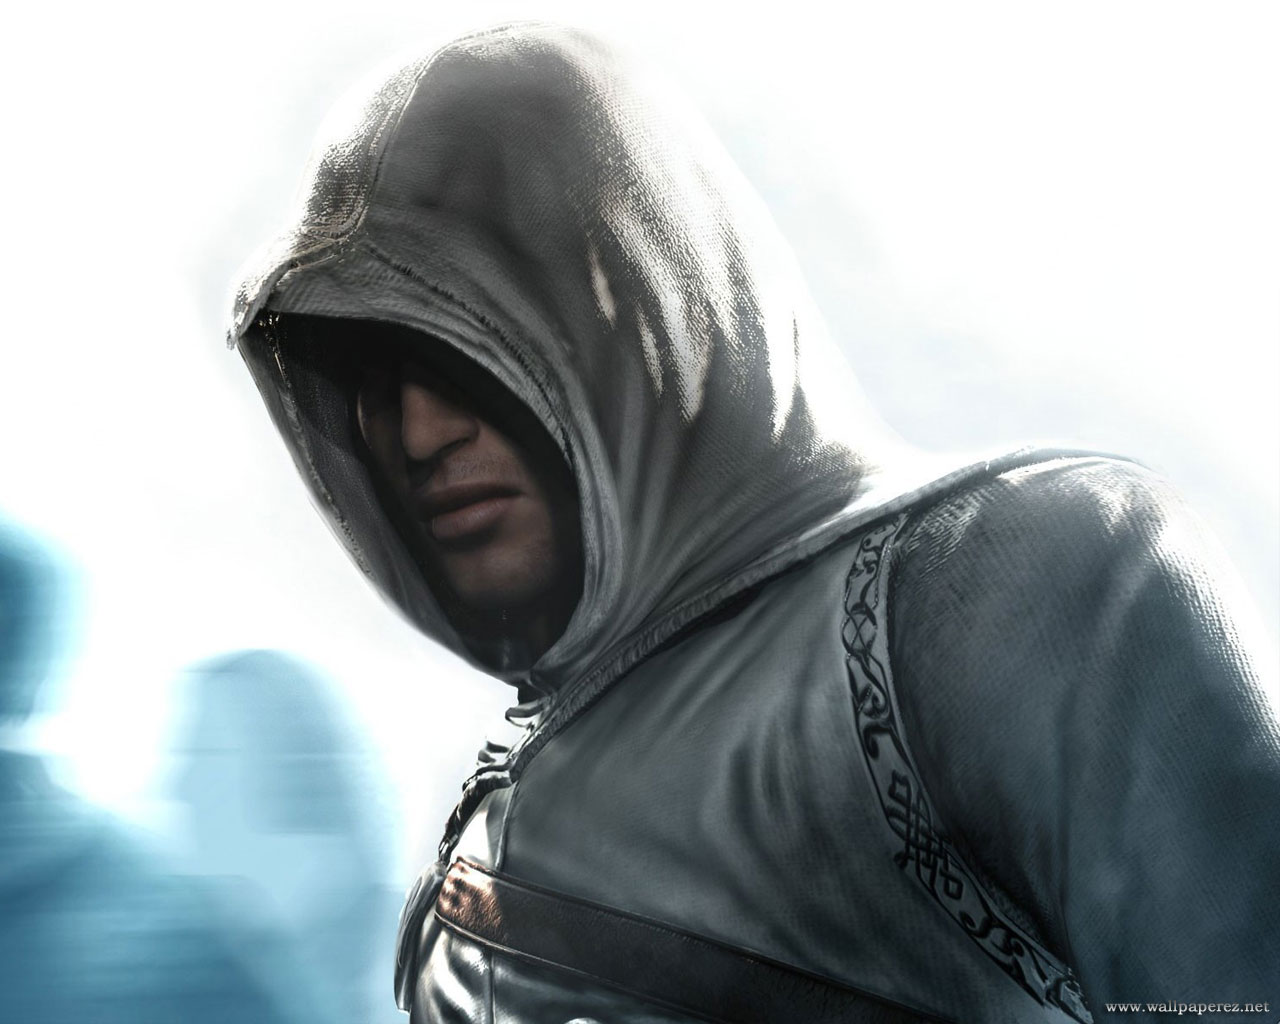 Here S Great Assassin Creed Wallpaper To